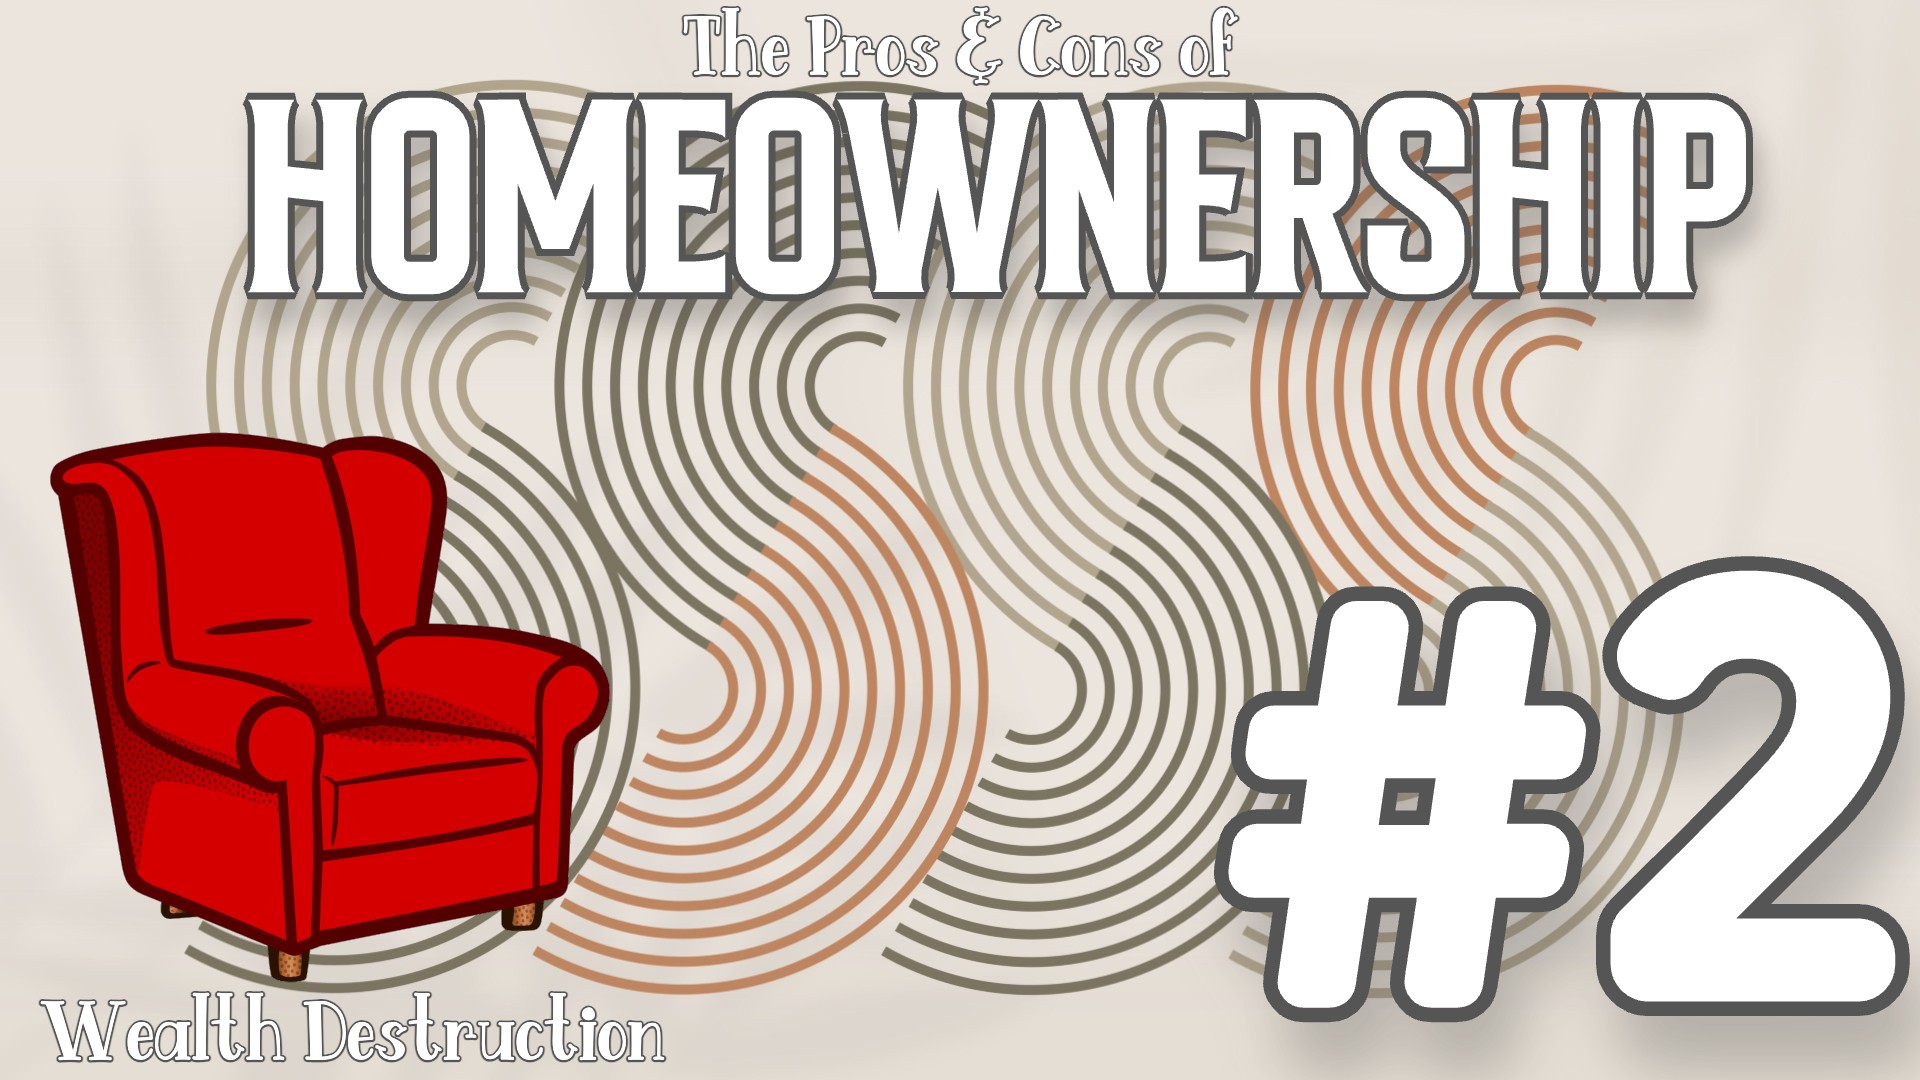 The Pros & Cons of Homeownership #2: Wealth Destruction